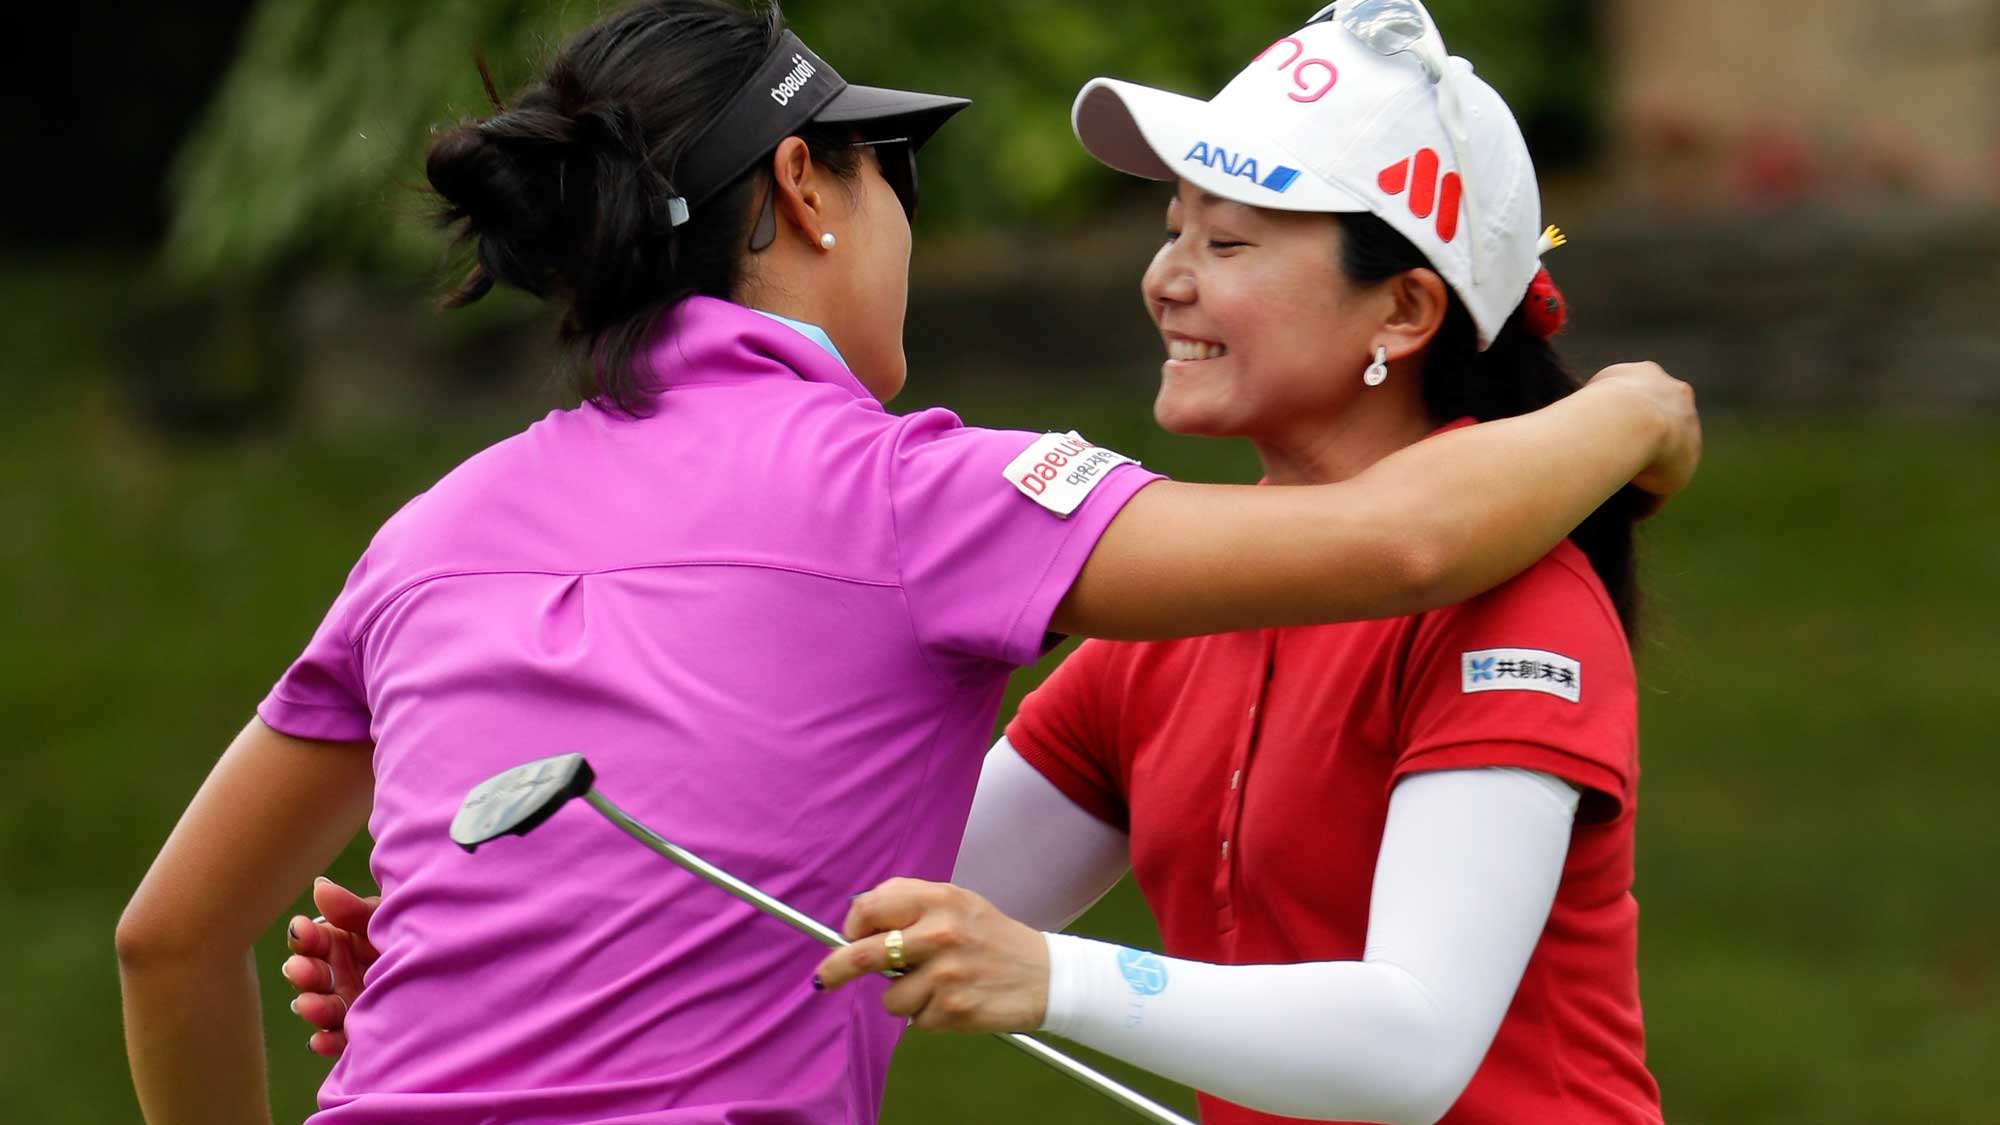 Ayako Uehara of Japan hugs Kelly W Shon on the 9th hole after their round during the first round of the Walmart NW Arkansas Championship